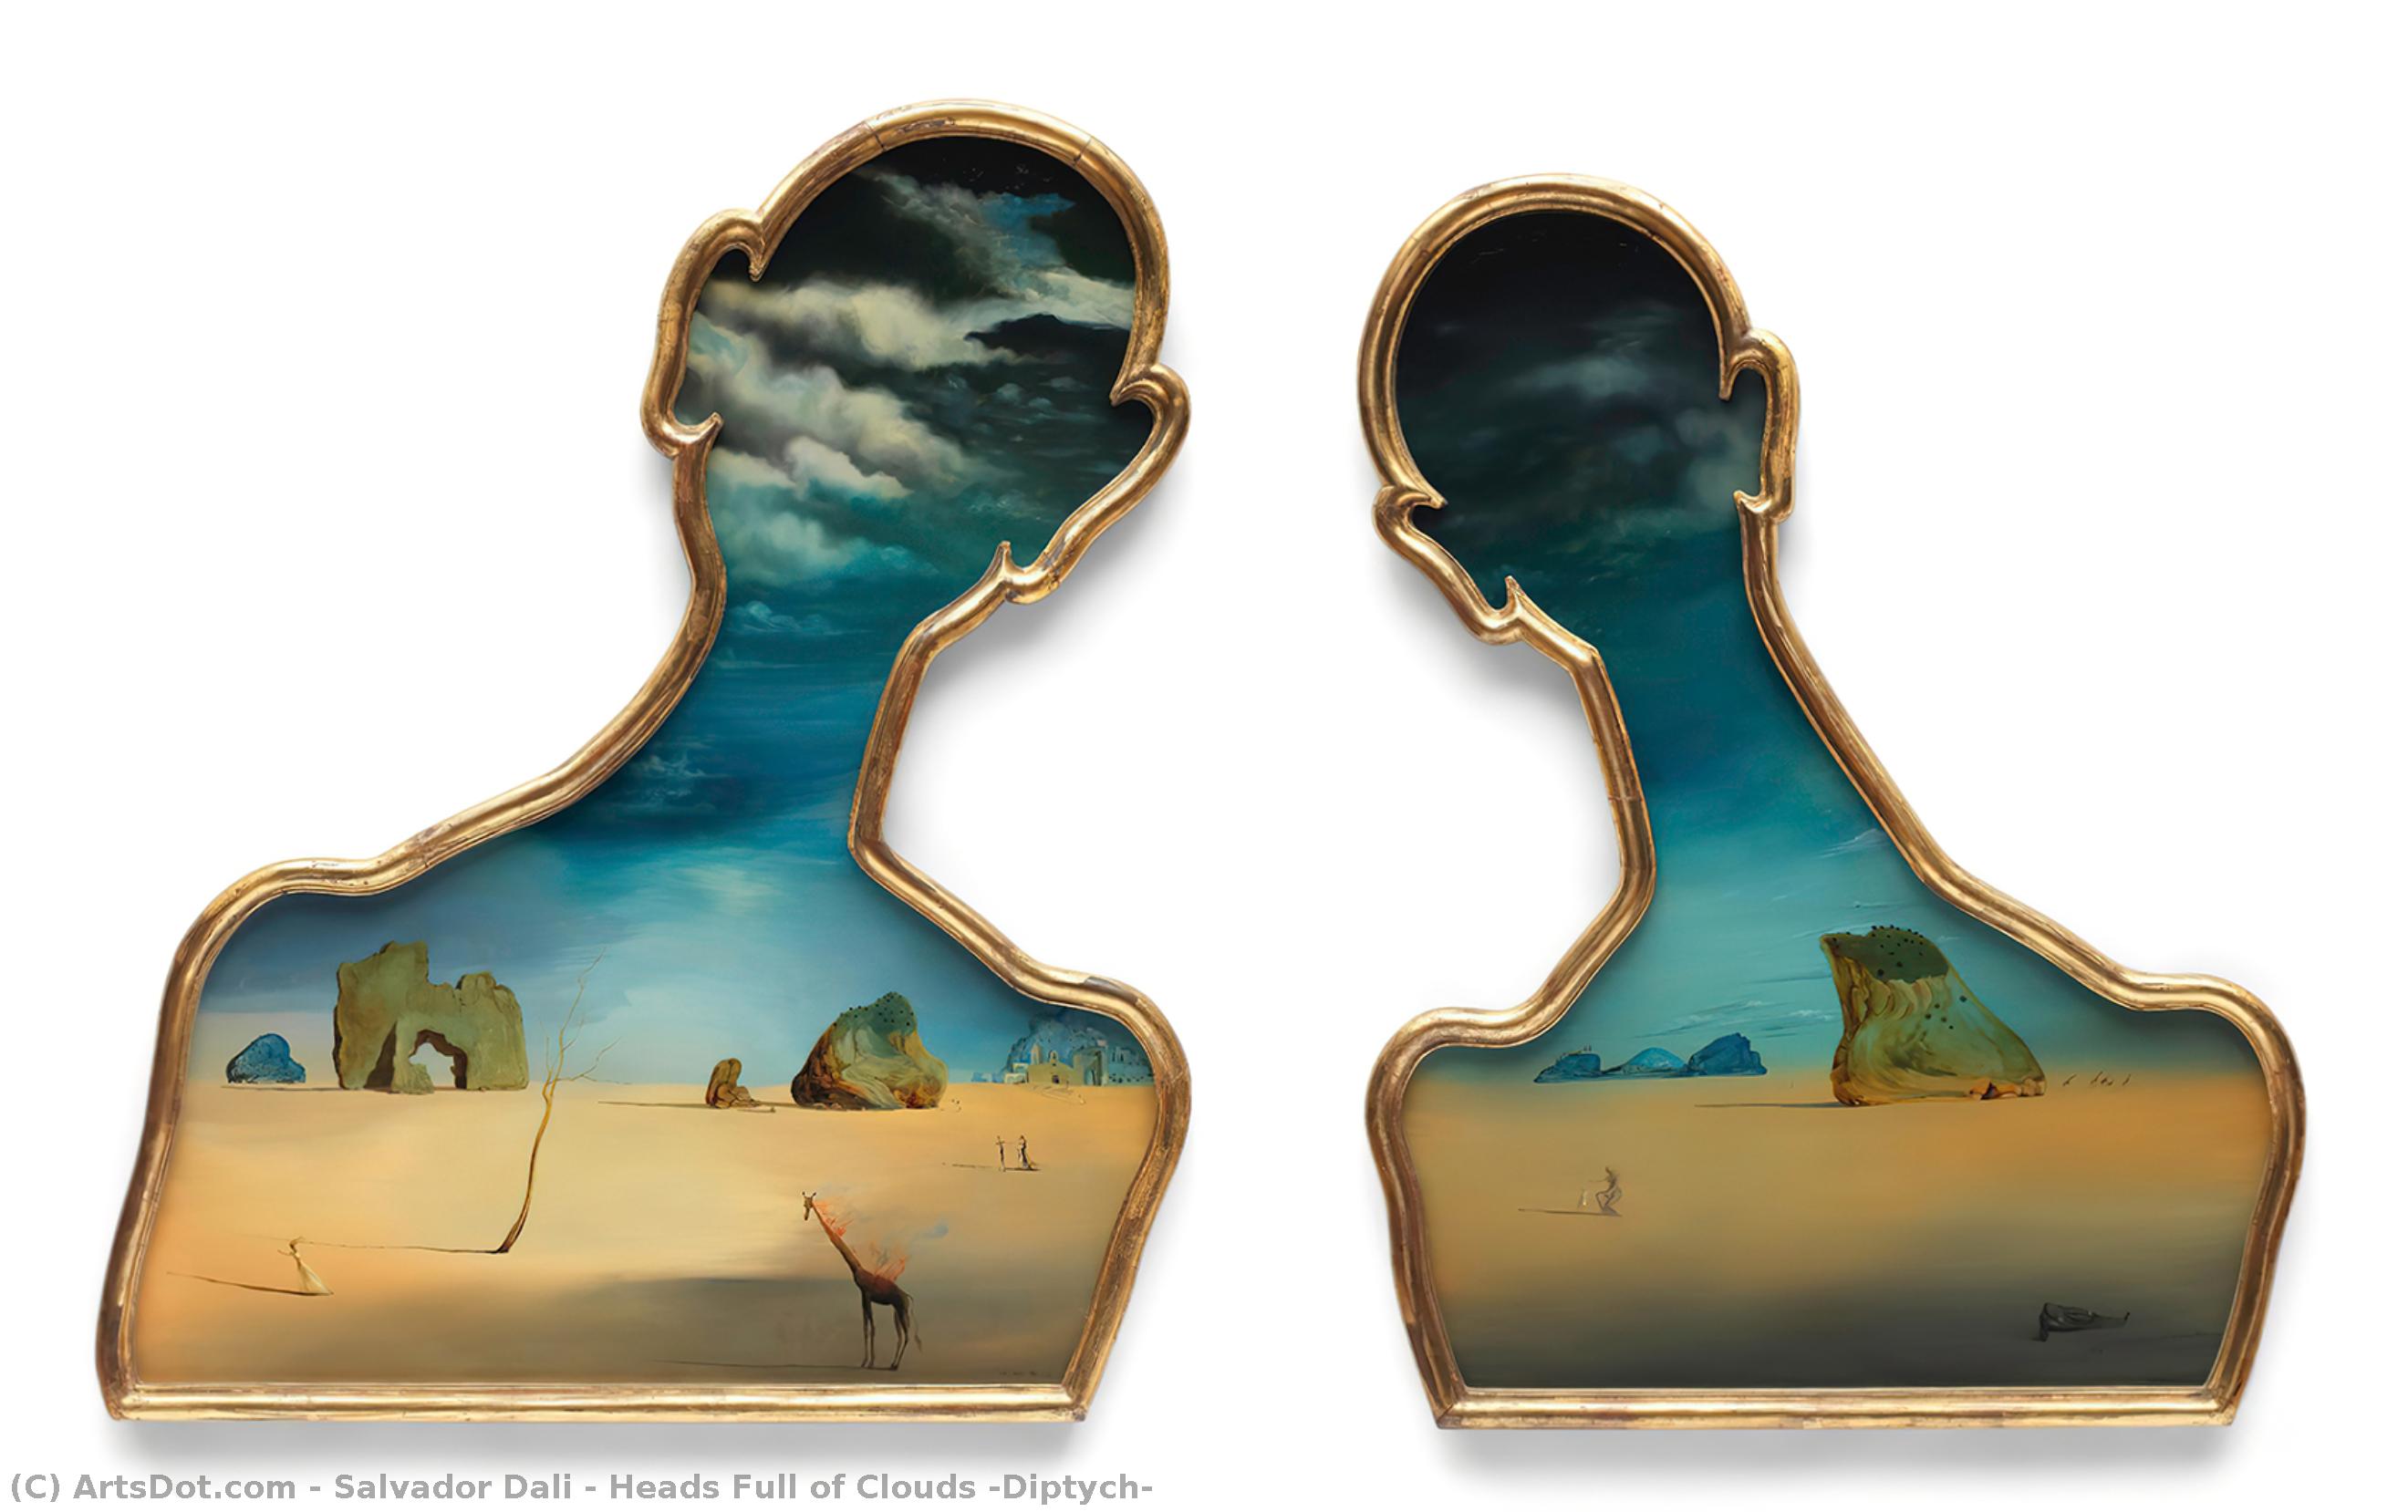  Paintings Reproductions Heads Full of Clouds (Diptych), 1936 by Salvador Dali (Inspired By) (1904-1989, Spain) | ArtsDot.com